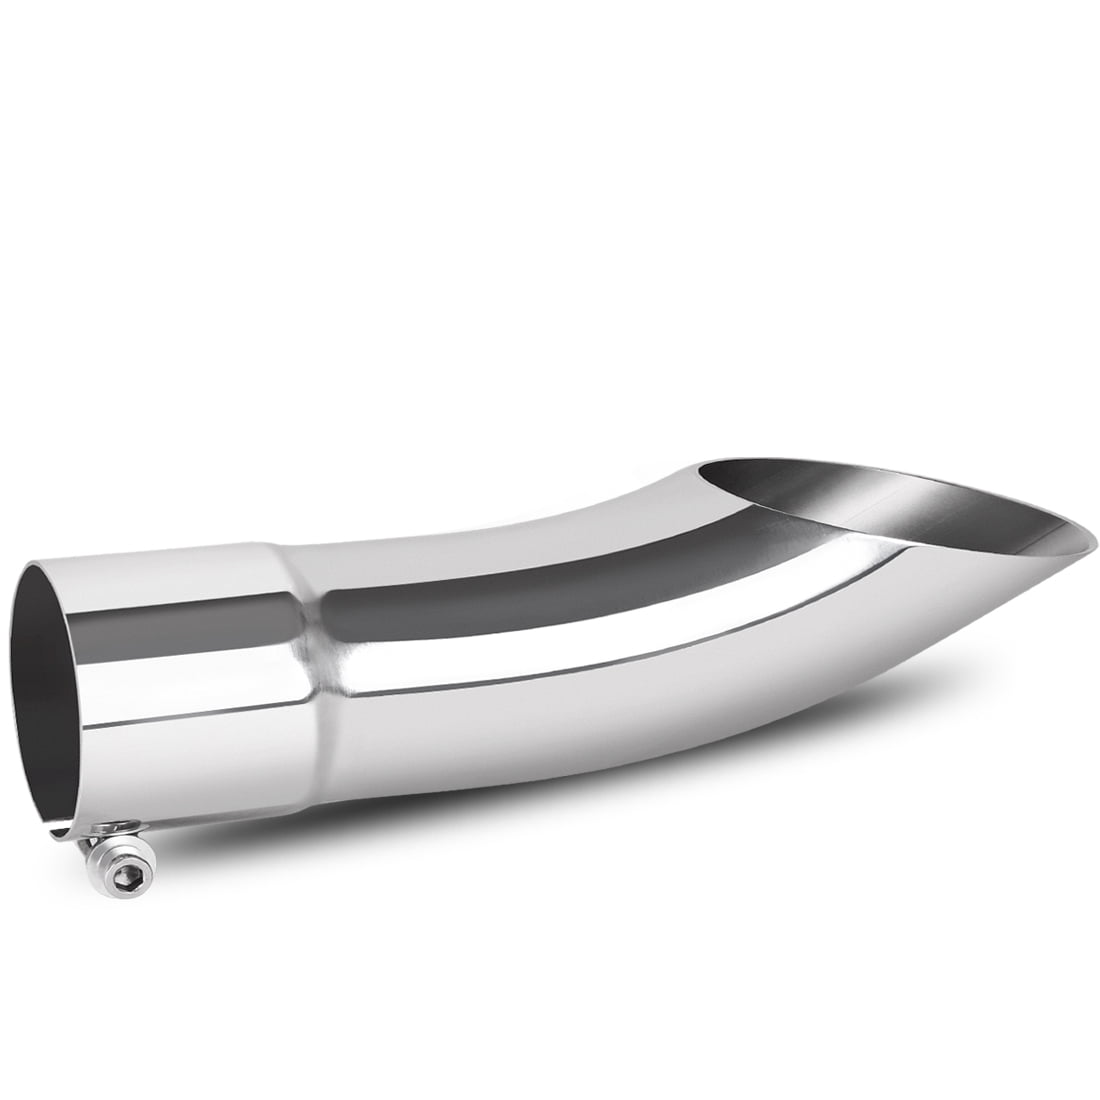 Exhaust Tips 3" Inlet & Outlet x 15" Long Polished Chrome Tailpipe